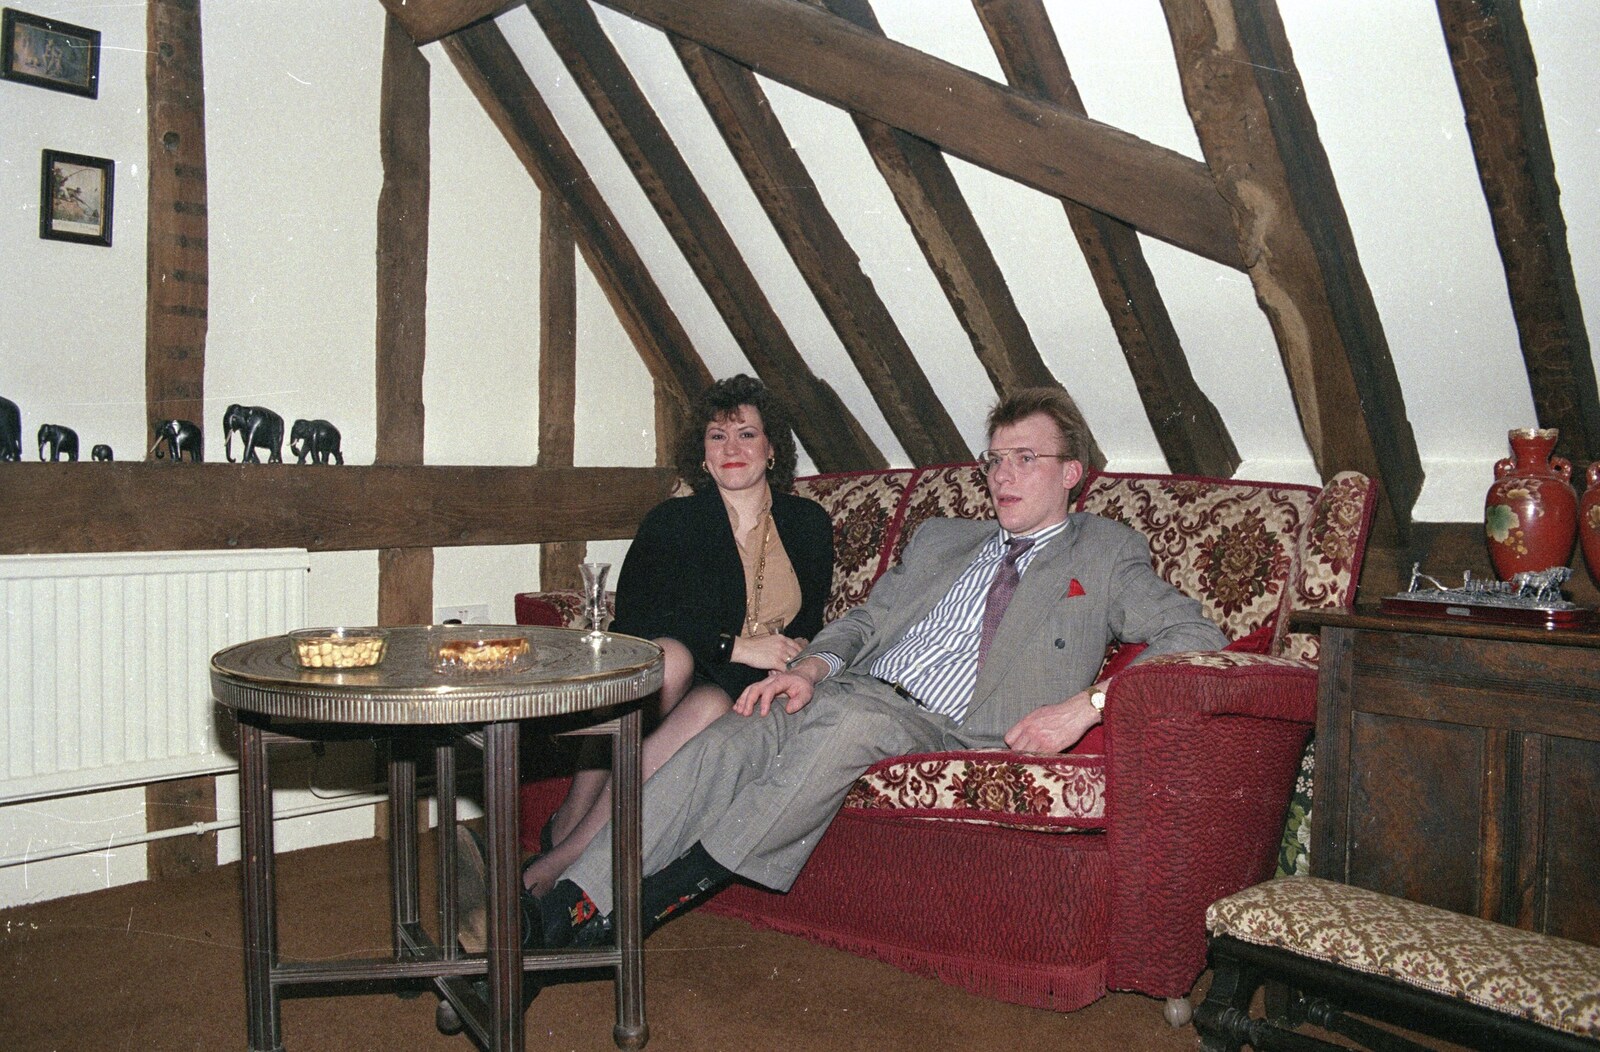 Relaxing up in the gallery from Christmas Dinner with Geoff and Brenda, Stuston, Suffolk - 25th December 1990